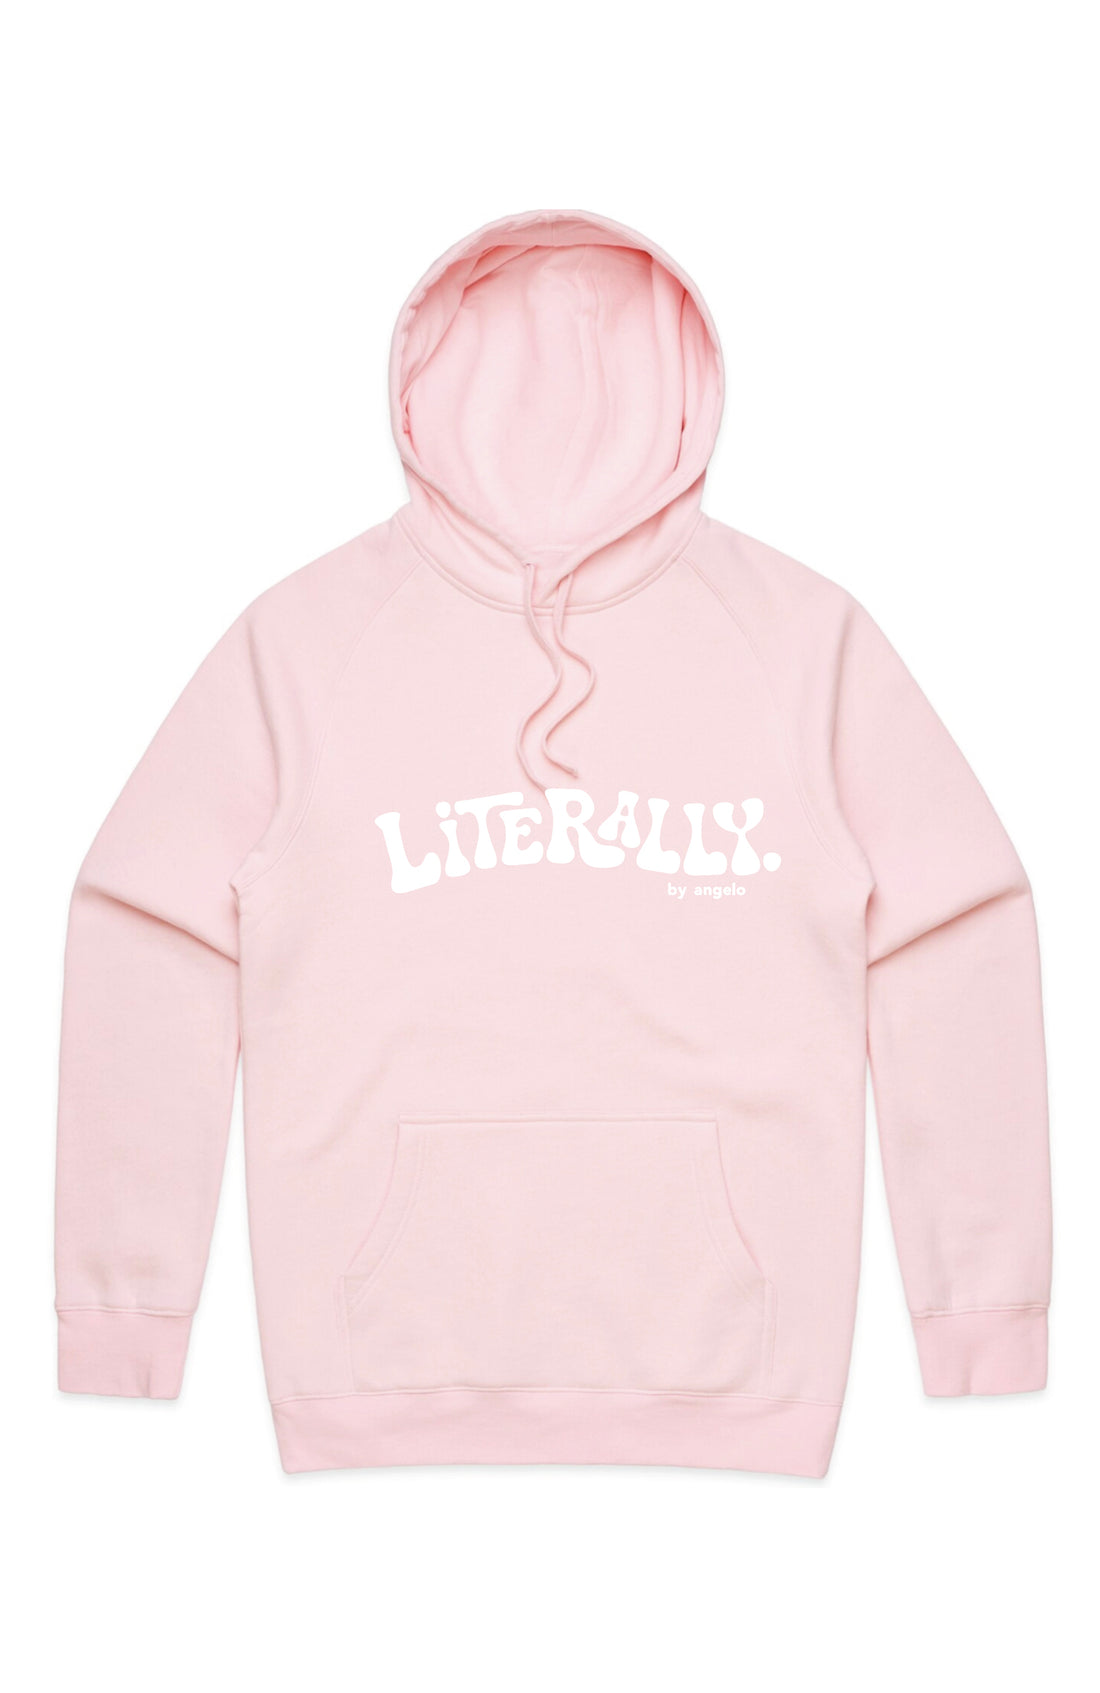 PROFESSIONAL & ETHICAL HOODIE (PINK) – LITERALLY BY ANGELO